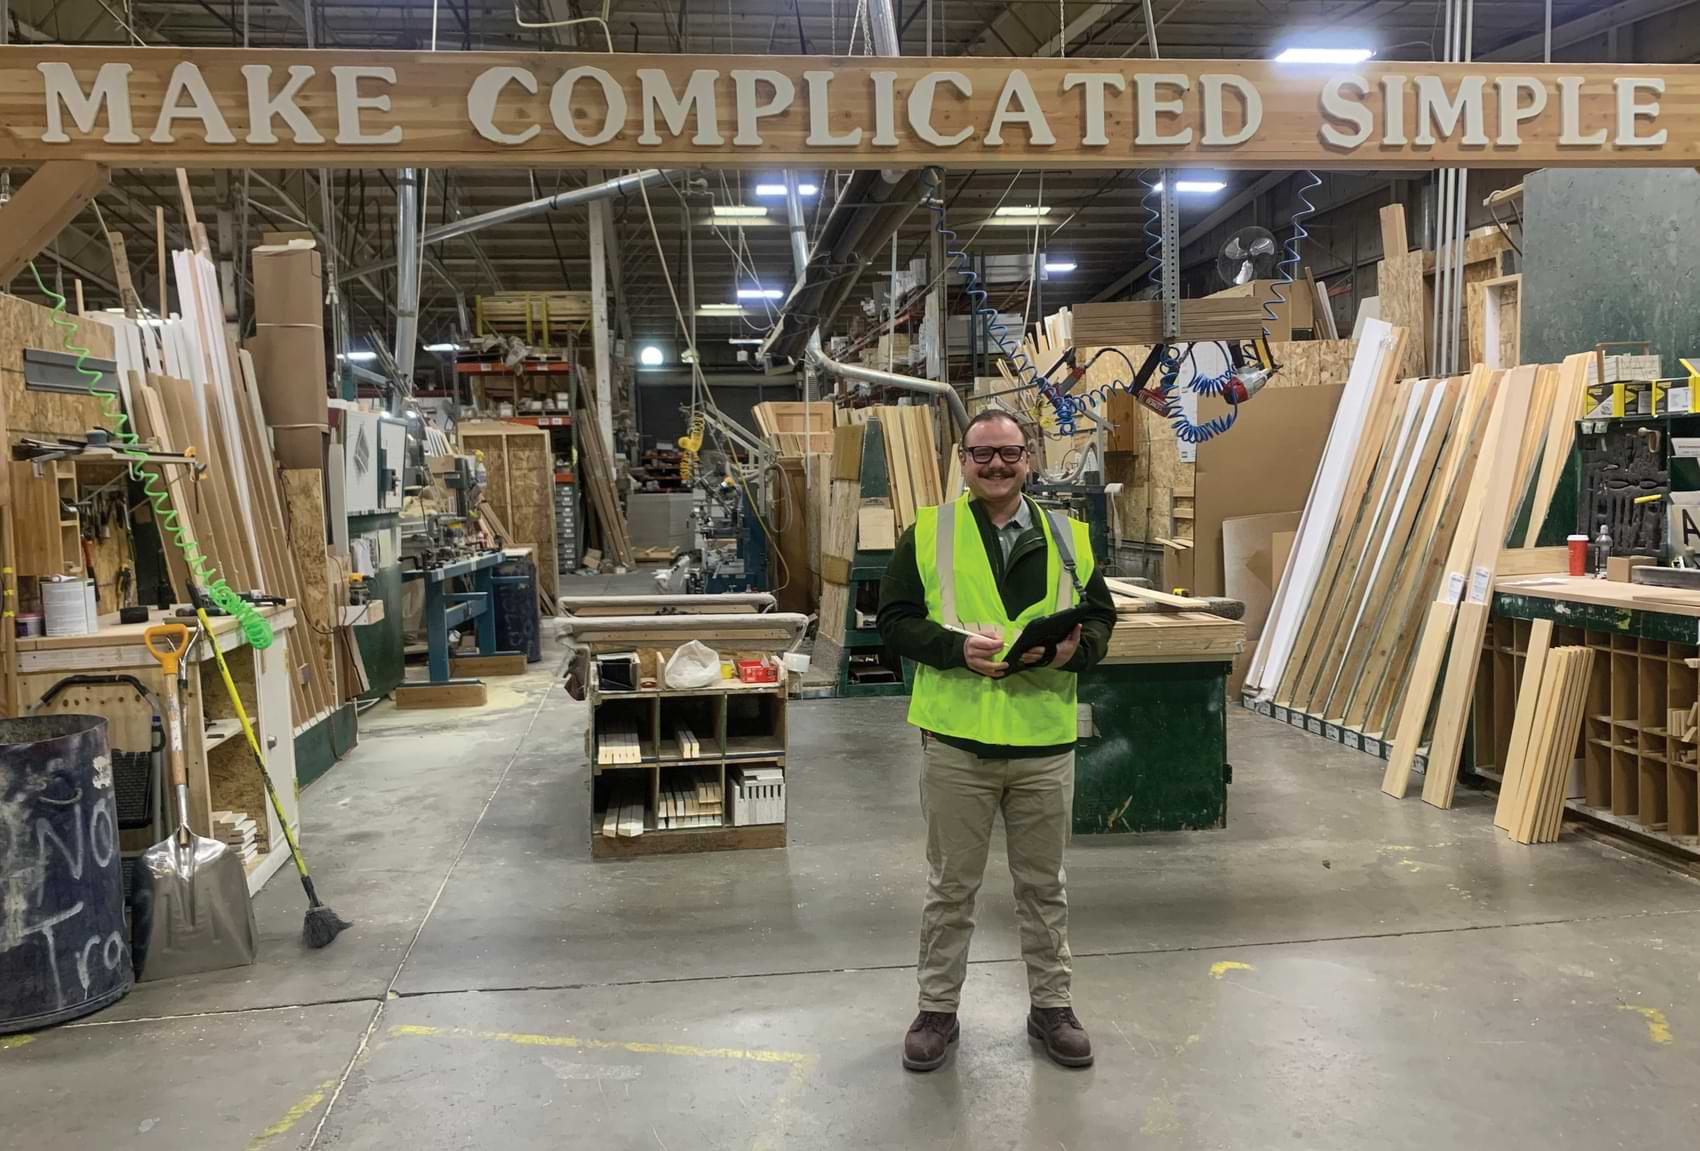 Jackson Waste standing underneath a sign emblazoned with the company’s mission, “Make Complicated Simple”